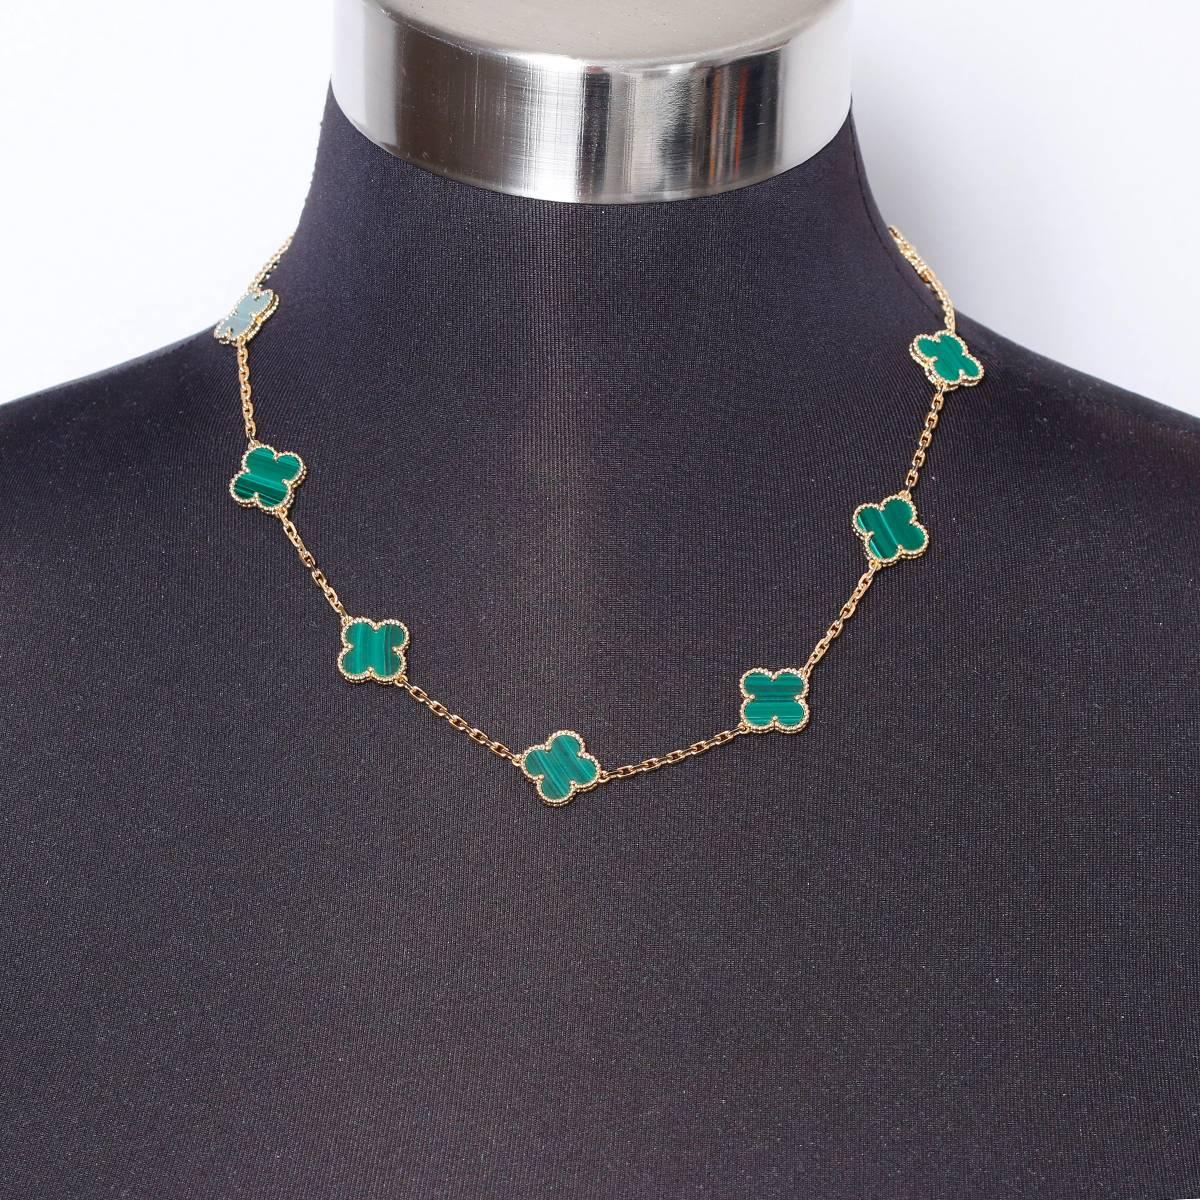 This Van Cleef & Arpels necklace is a part of the Vintage Alhambra Collection. It features 10 malachite iconic motifs in 18k yellow  gold. It is stamped VCA, AU750, JE606179. It measures apx. 16-1/2 inches in length and weighs 28.4 grams.Van Cleef